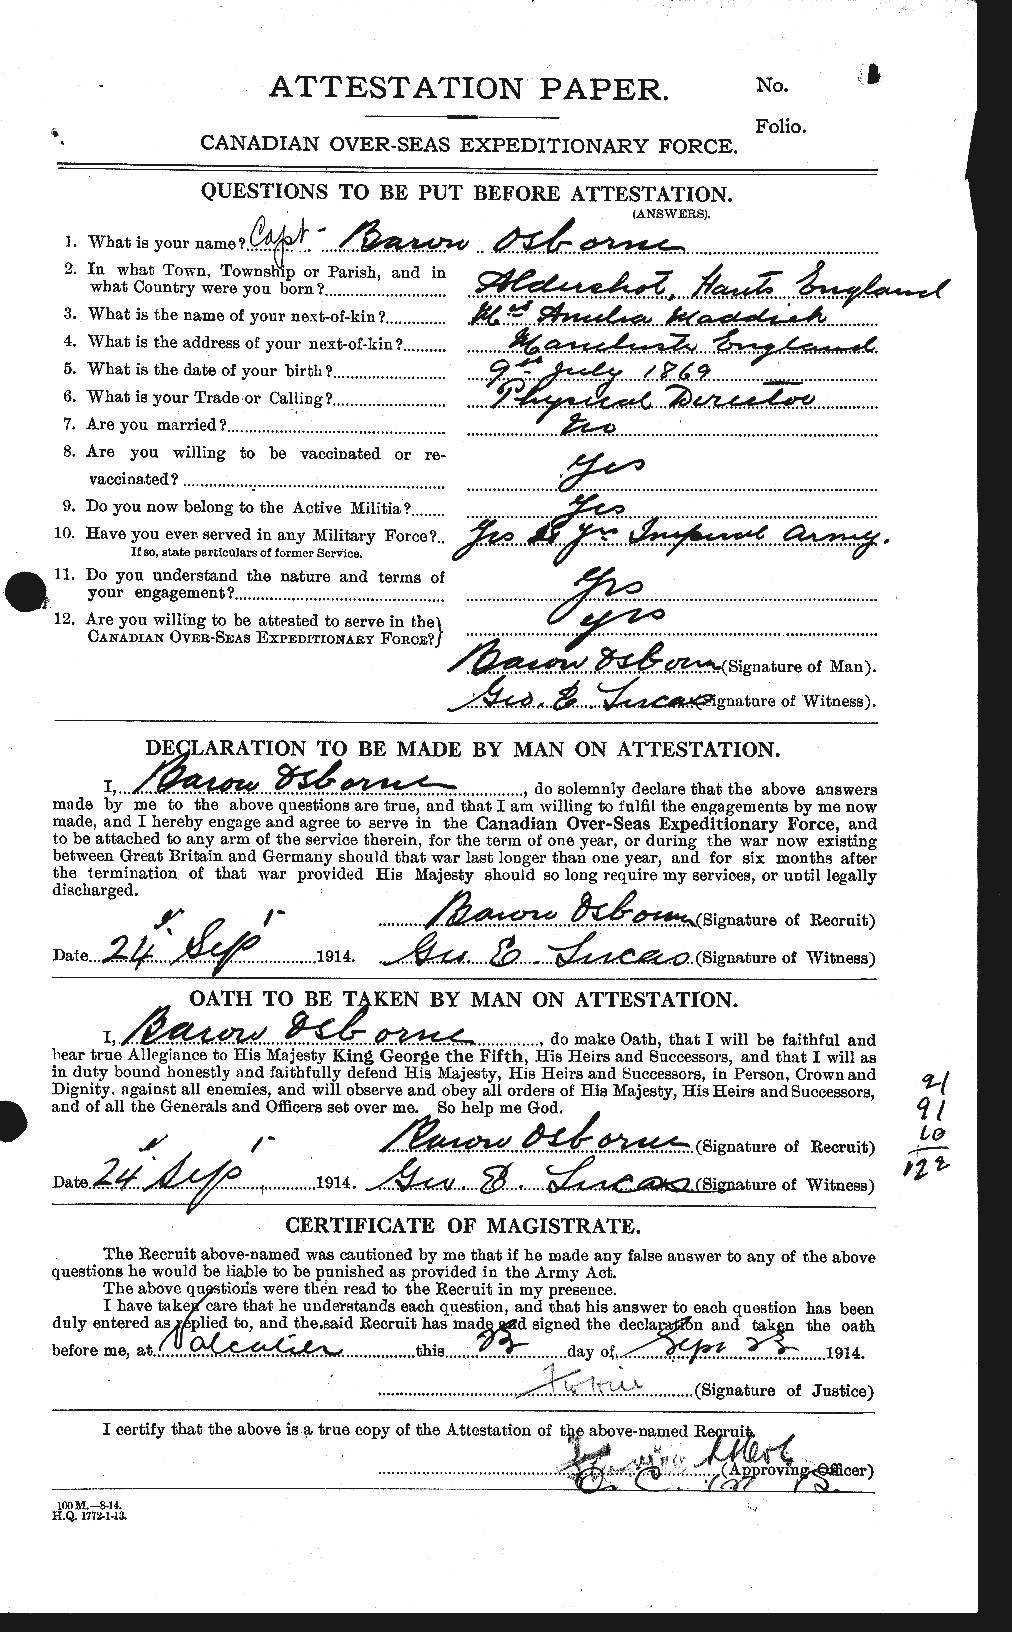 Personnel Records of the First World War - CEF 559162a